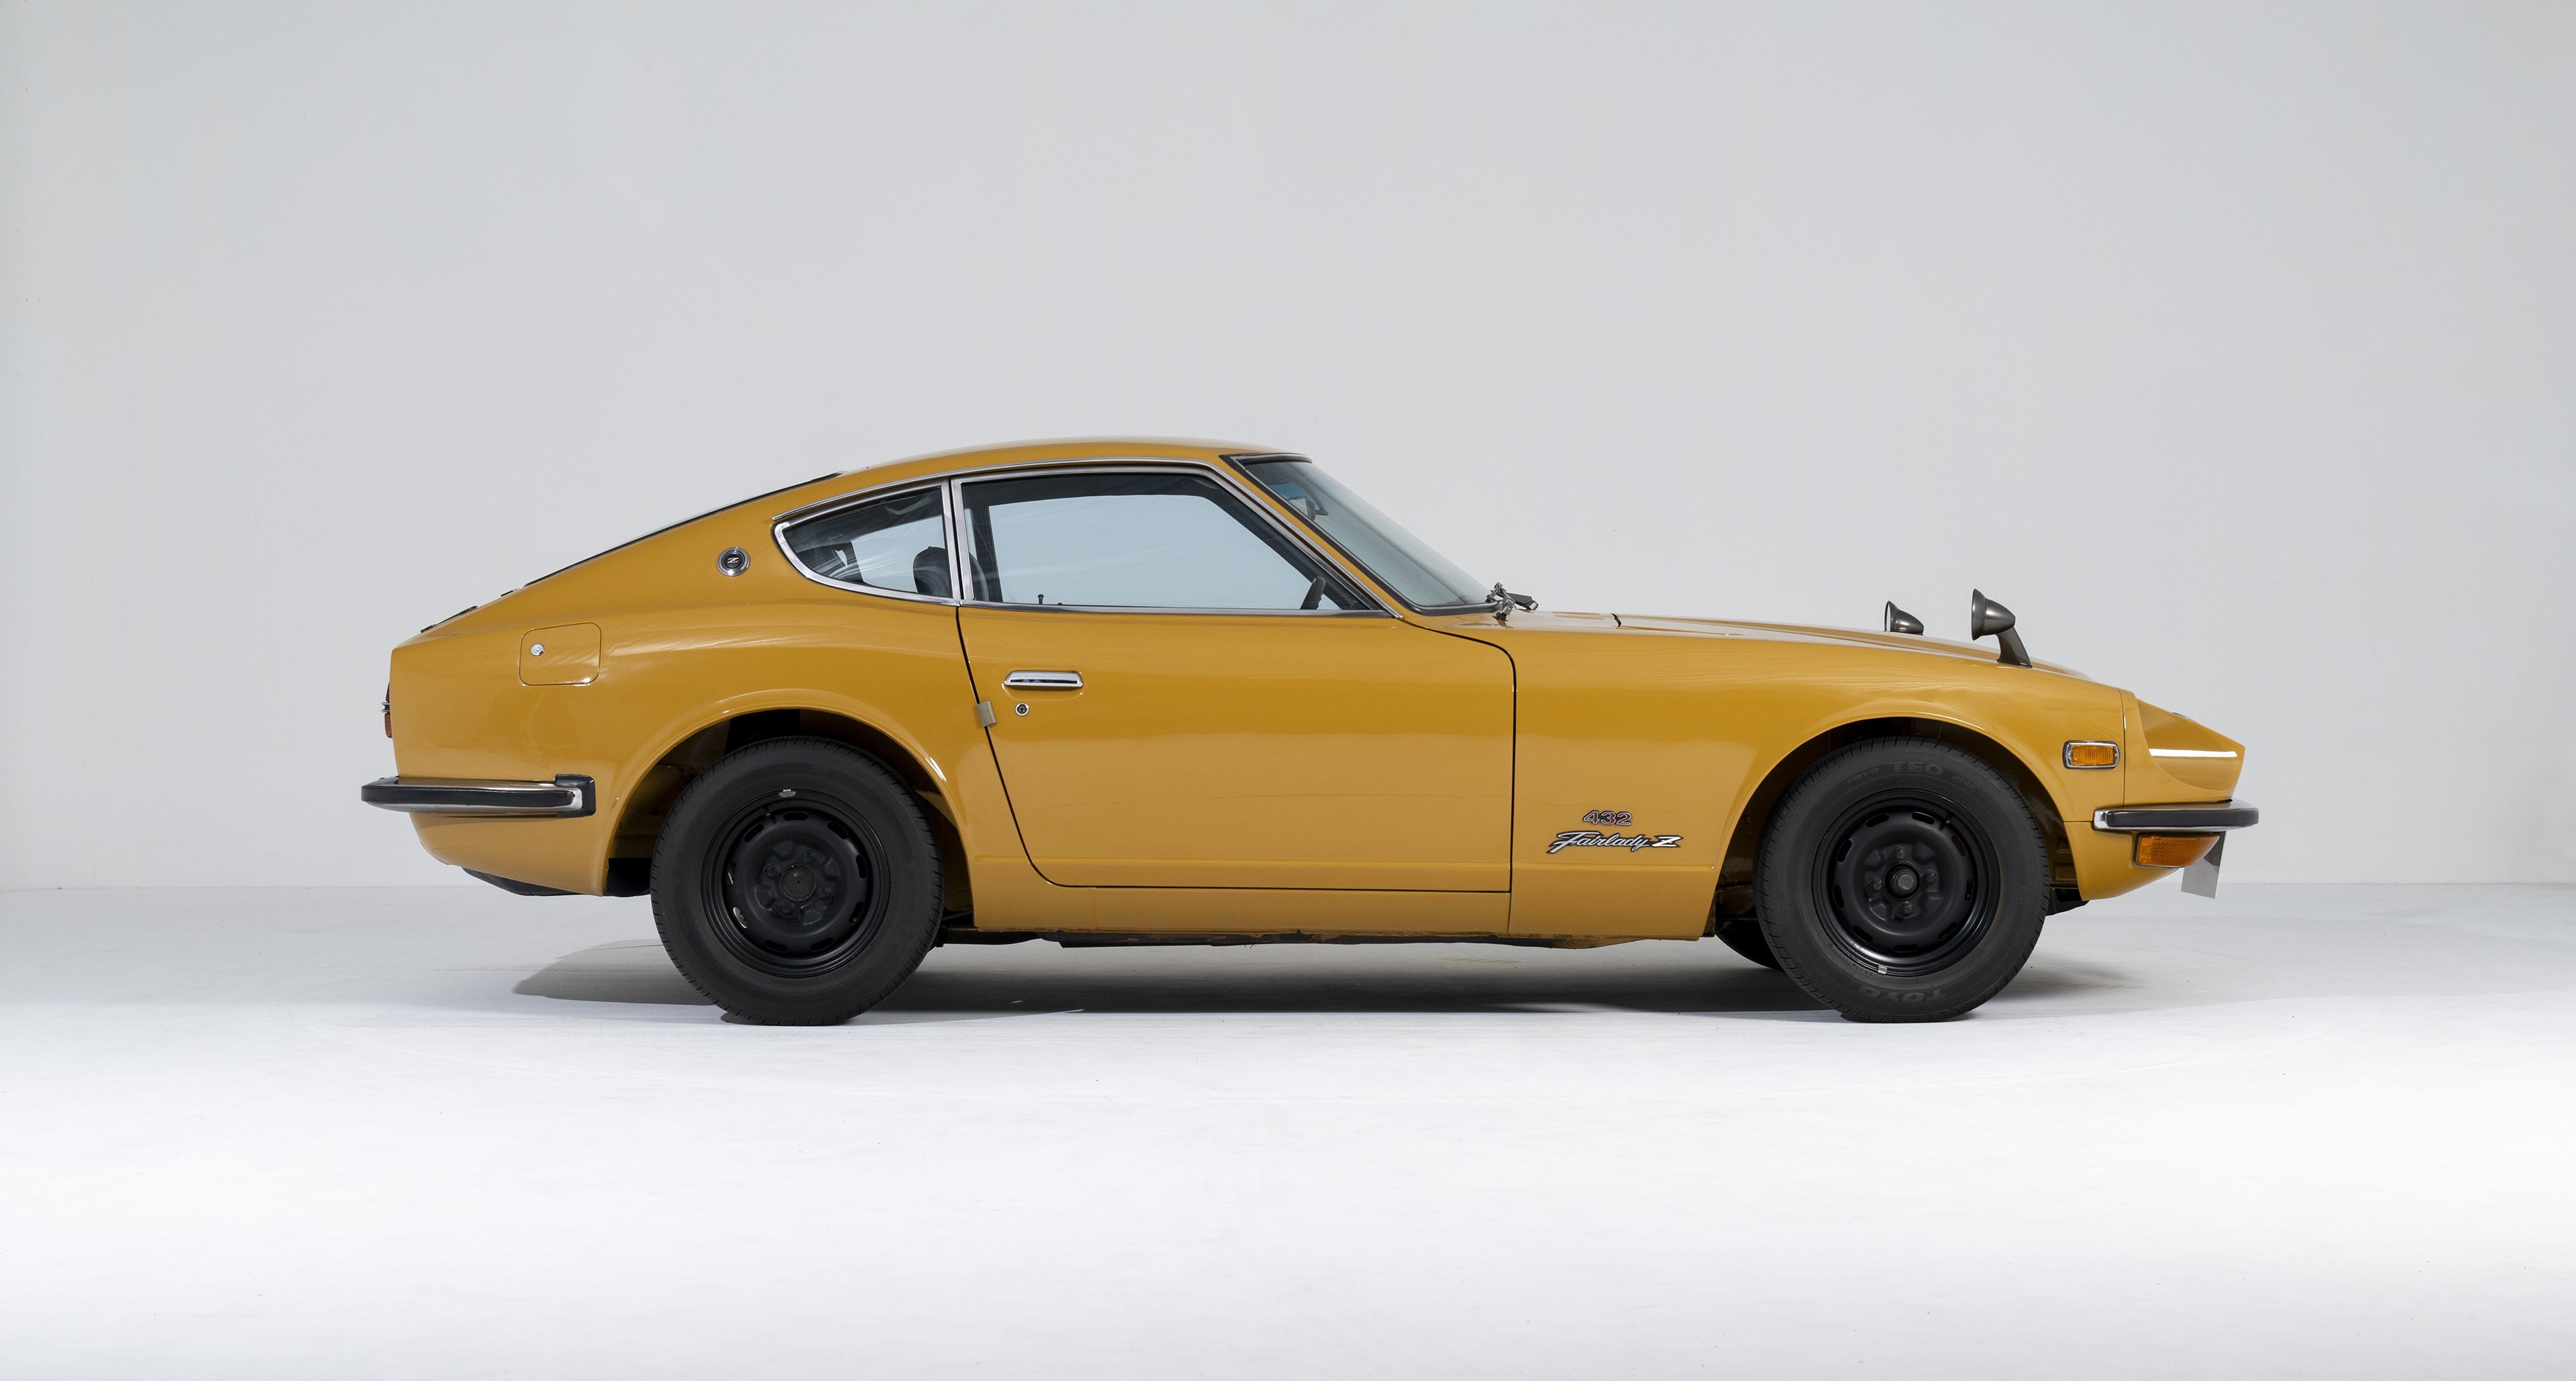 You won't be catching Zs with this Nissan Fairlady on your drive 